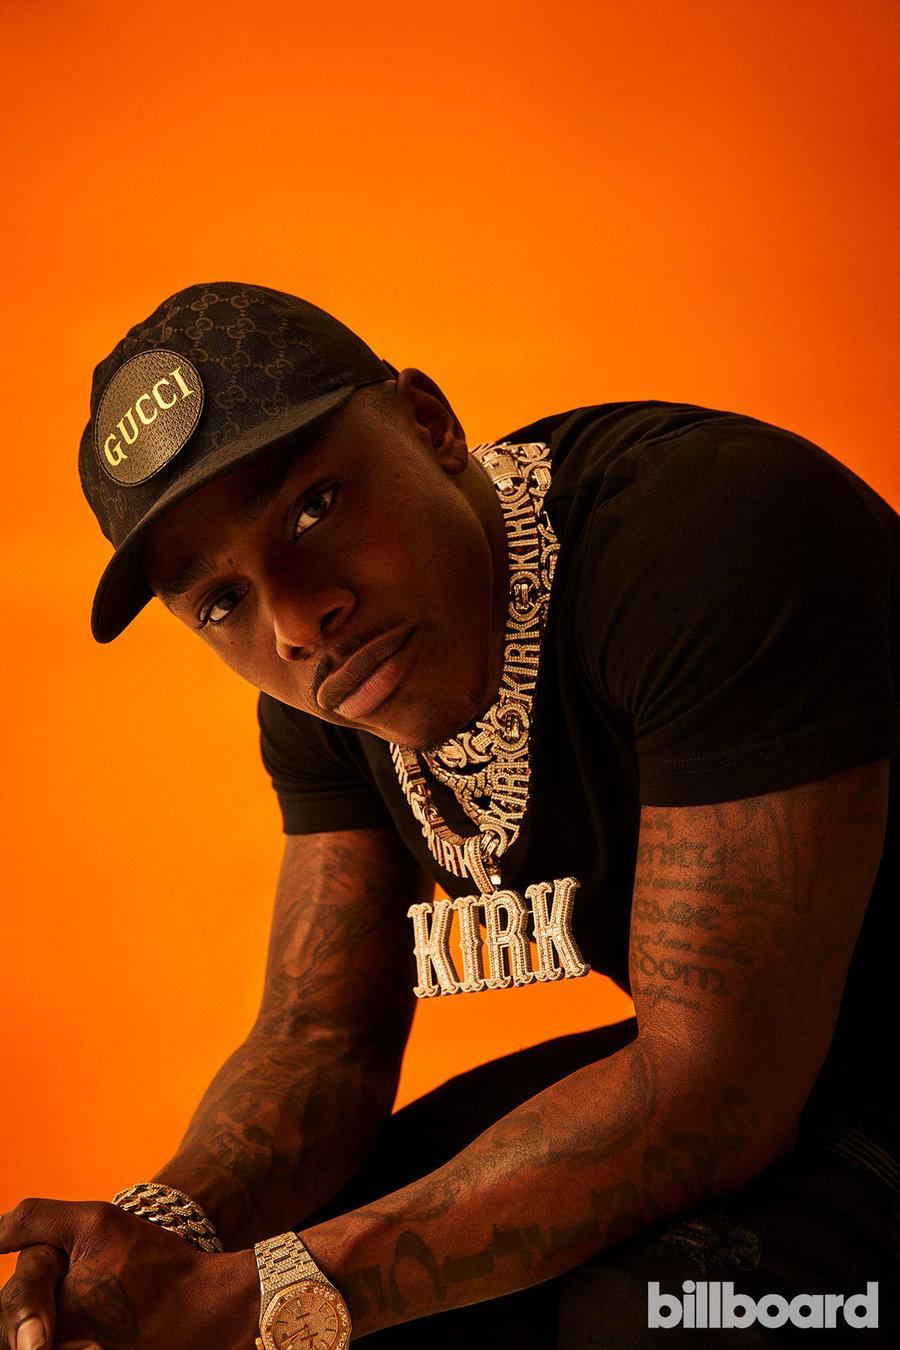 DaBaby: Photo From the Billboard Cover Shoot